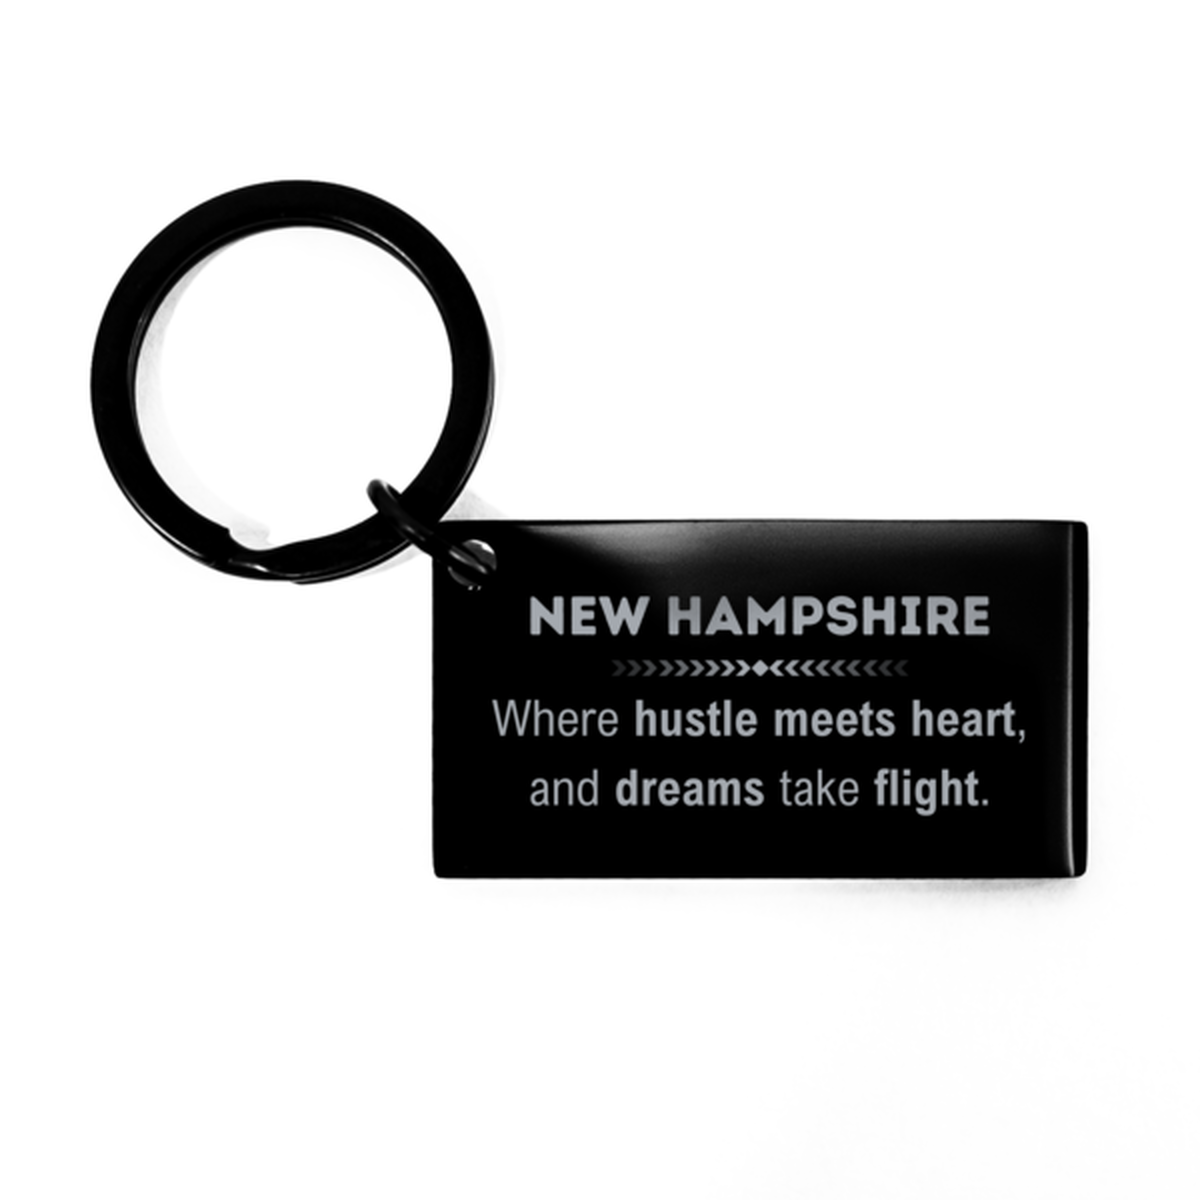 New Hampshire: Where hustle meets heart, and dreams take flight, New Hampshire Gifts, Proud New Hampshire Christmas Birthday New Hampshire Keychain, New Hampshire State People, Men, Women, Friends